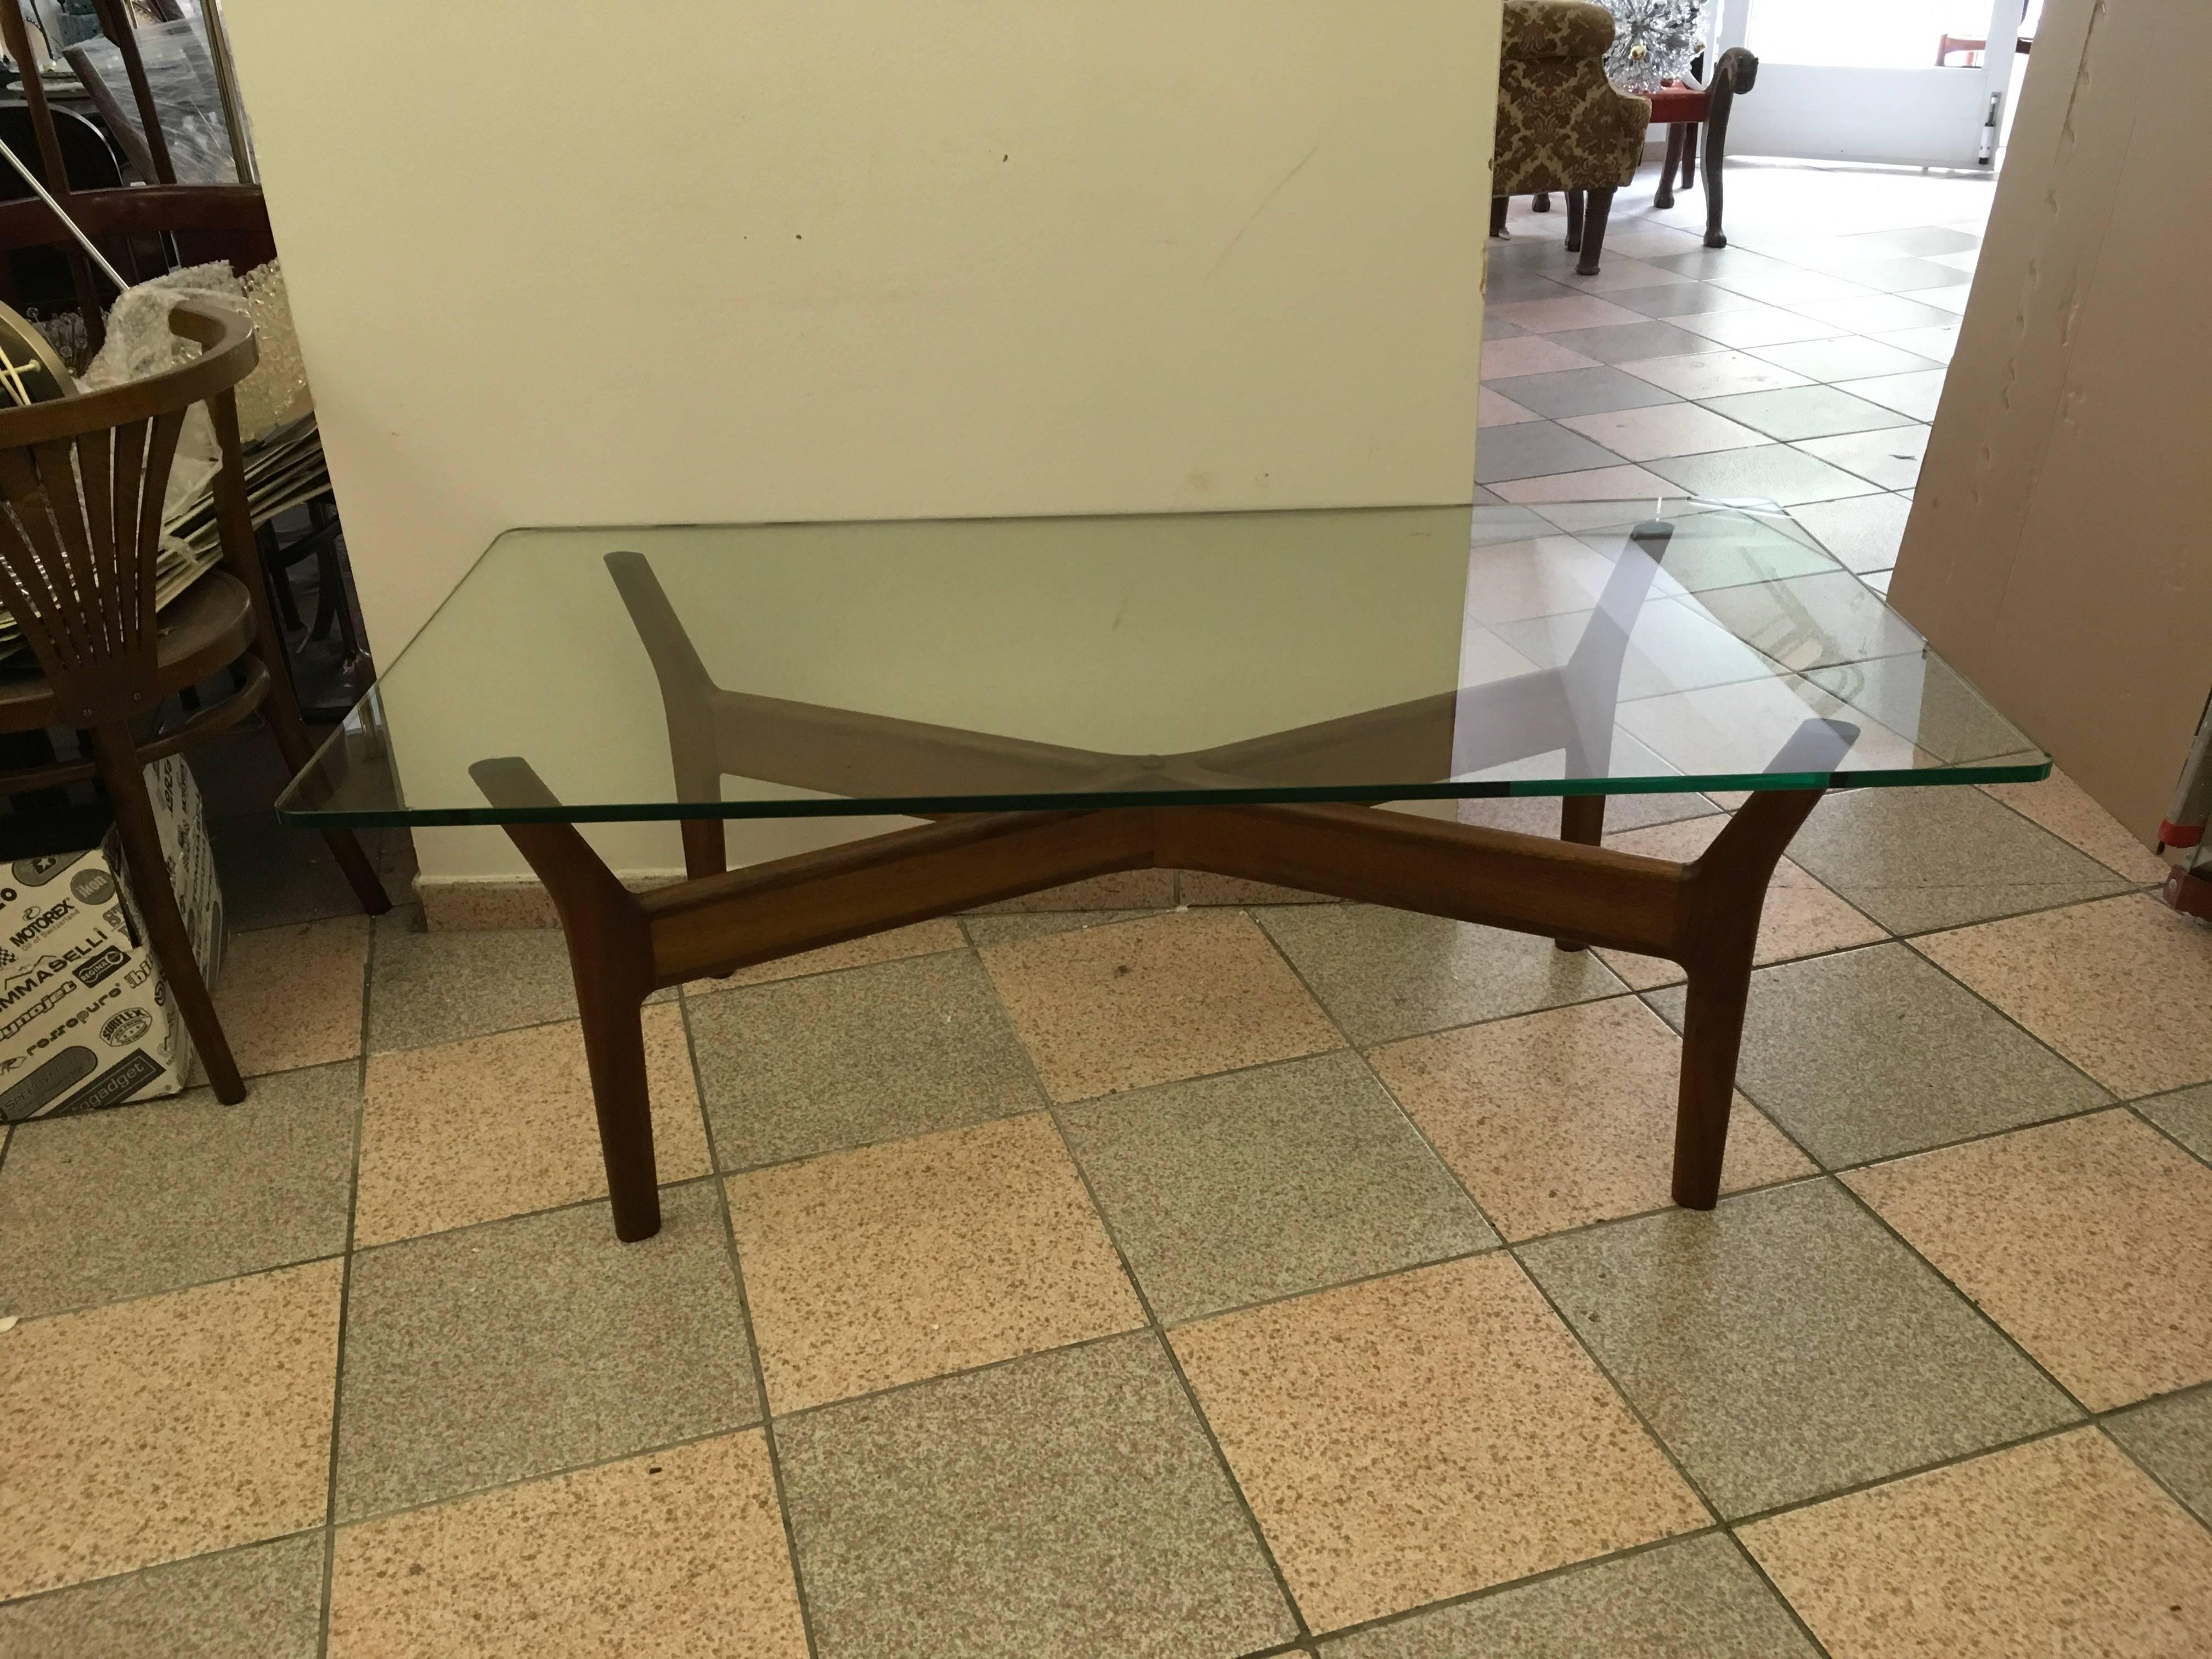 Teak construction with heavy glass tabletop. Designed by Alf Svensson in the 1950s.
Some very small glass nicks, hardly visible. (See attached pictures).